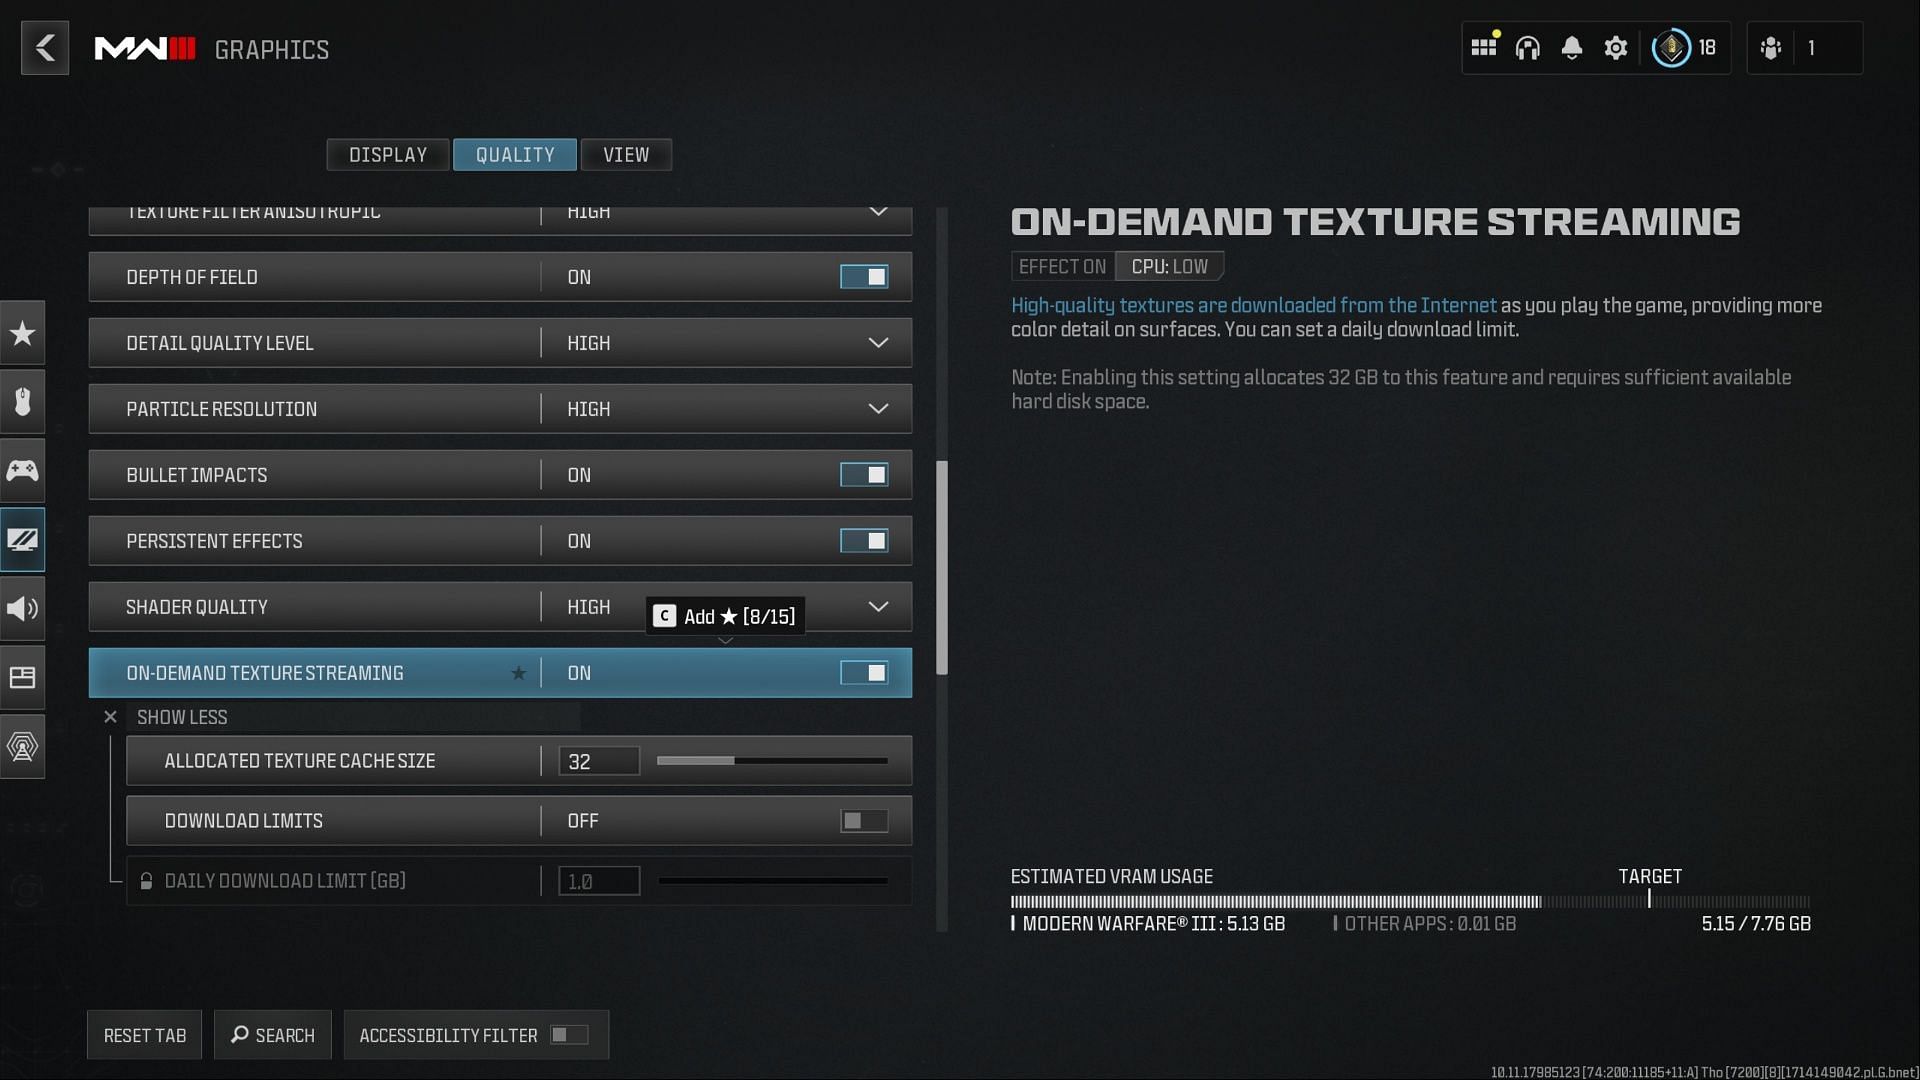 On-Demand Texture Streaming option (Image via Activision)